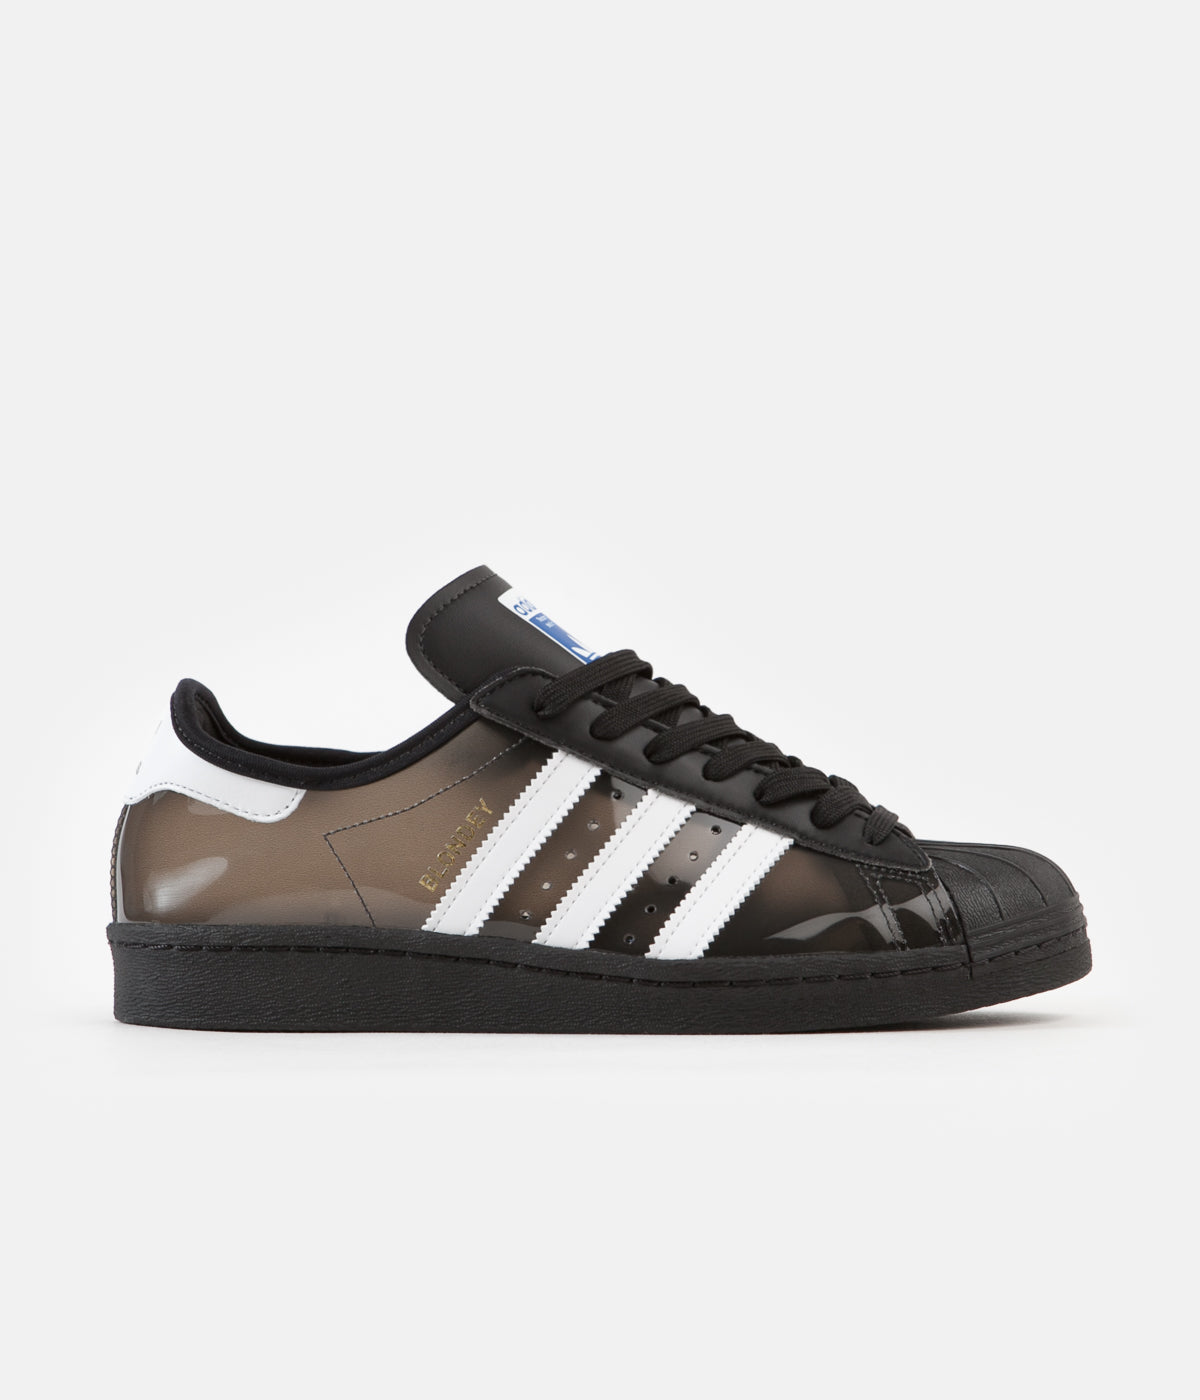 adidas boost dress shoes